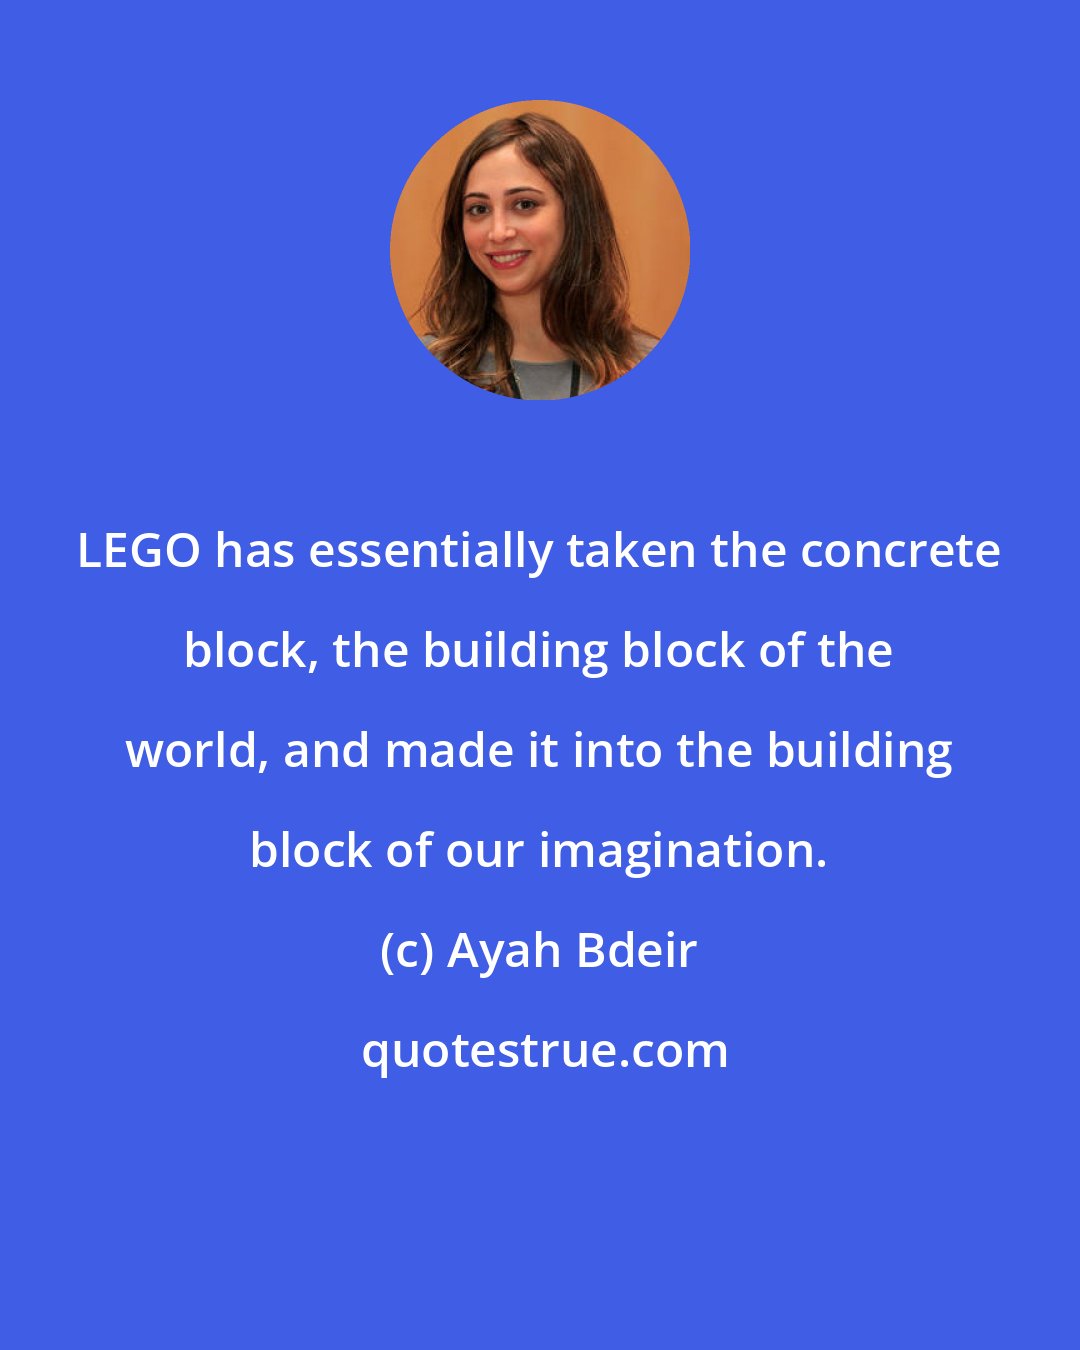 Ayah Bdeir: LEGO has essentially taken the concrete block, the building block of the world, and made it into the building block of our imagination.